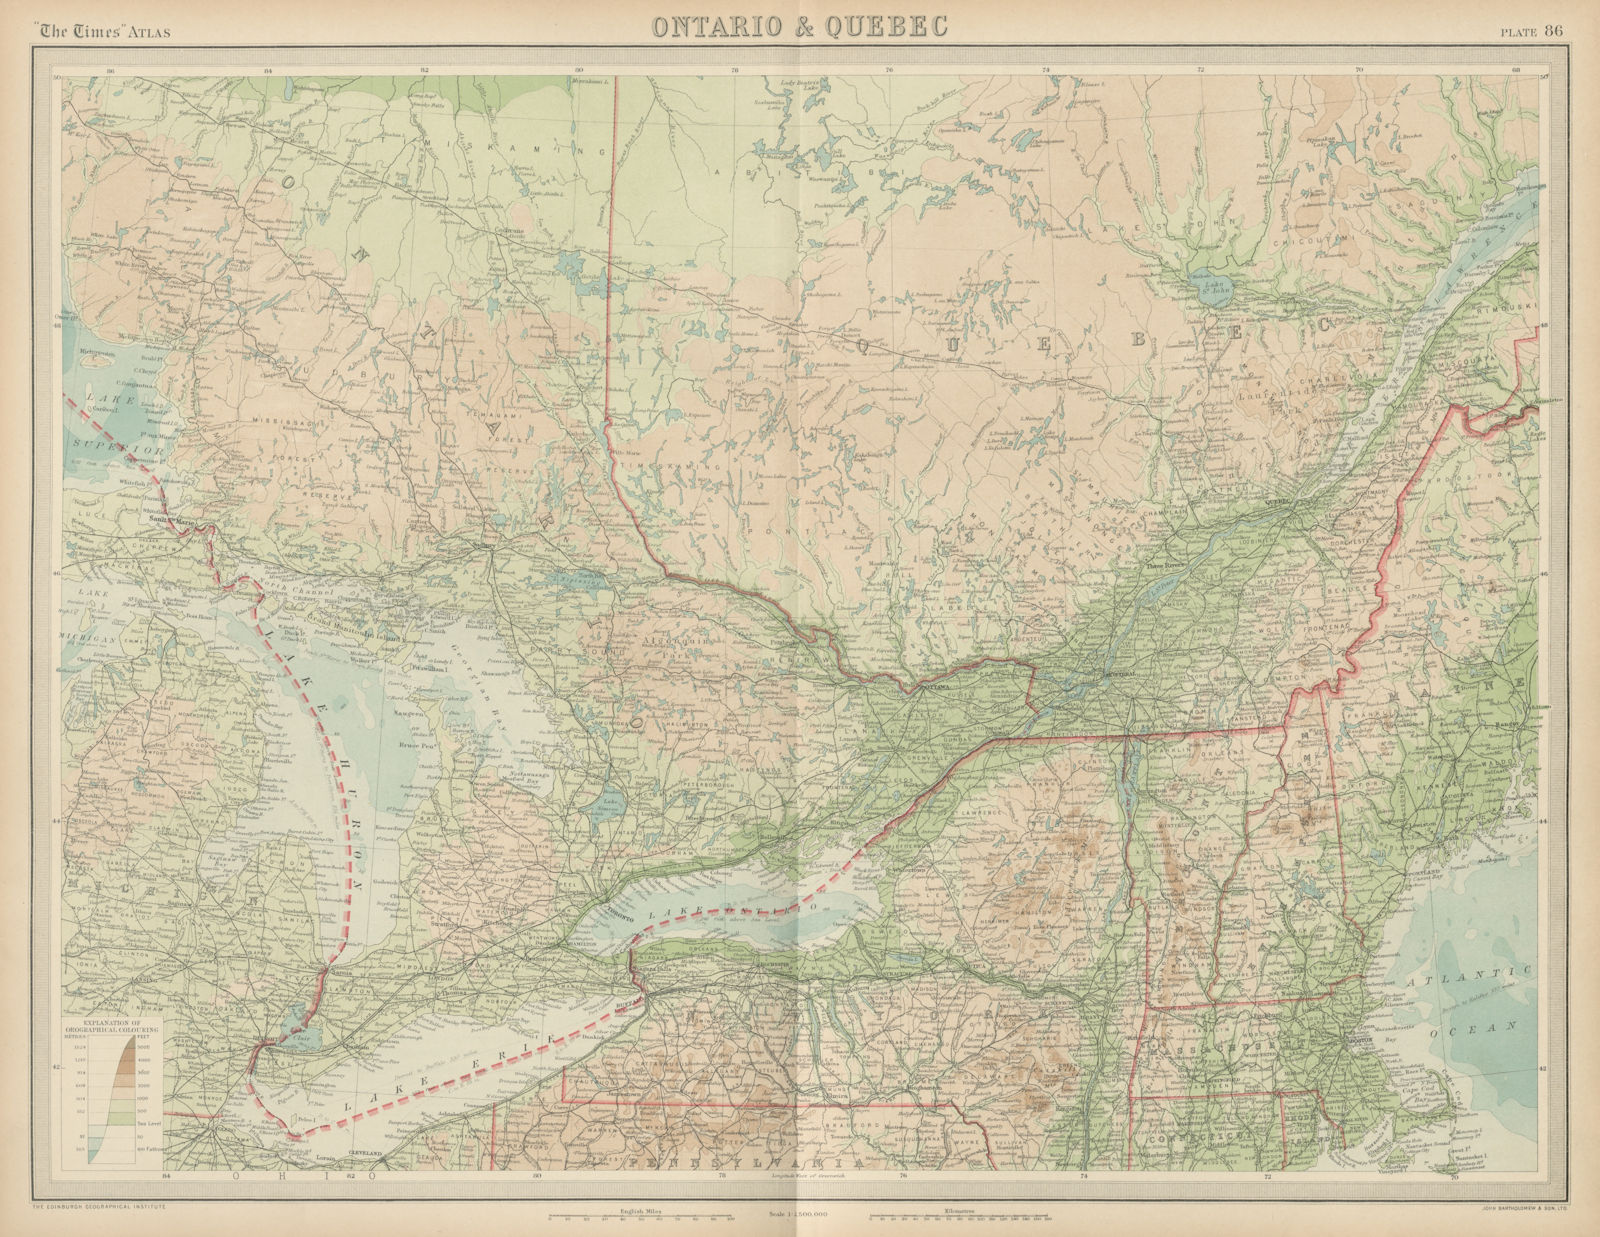 Associate Product Southern Ontario & Quebec. Canada. THE TIMES 1922 old vintage map plan chart